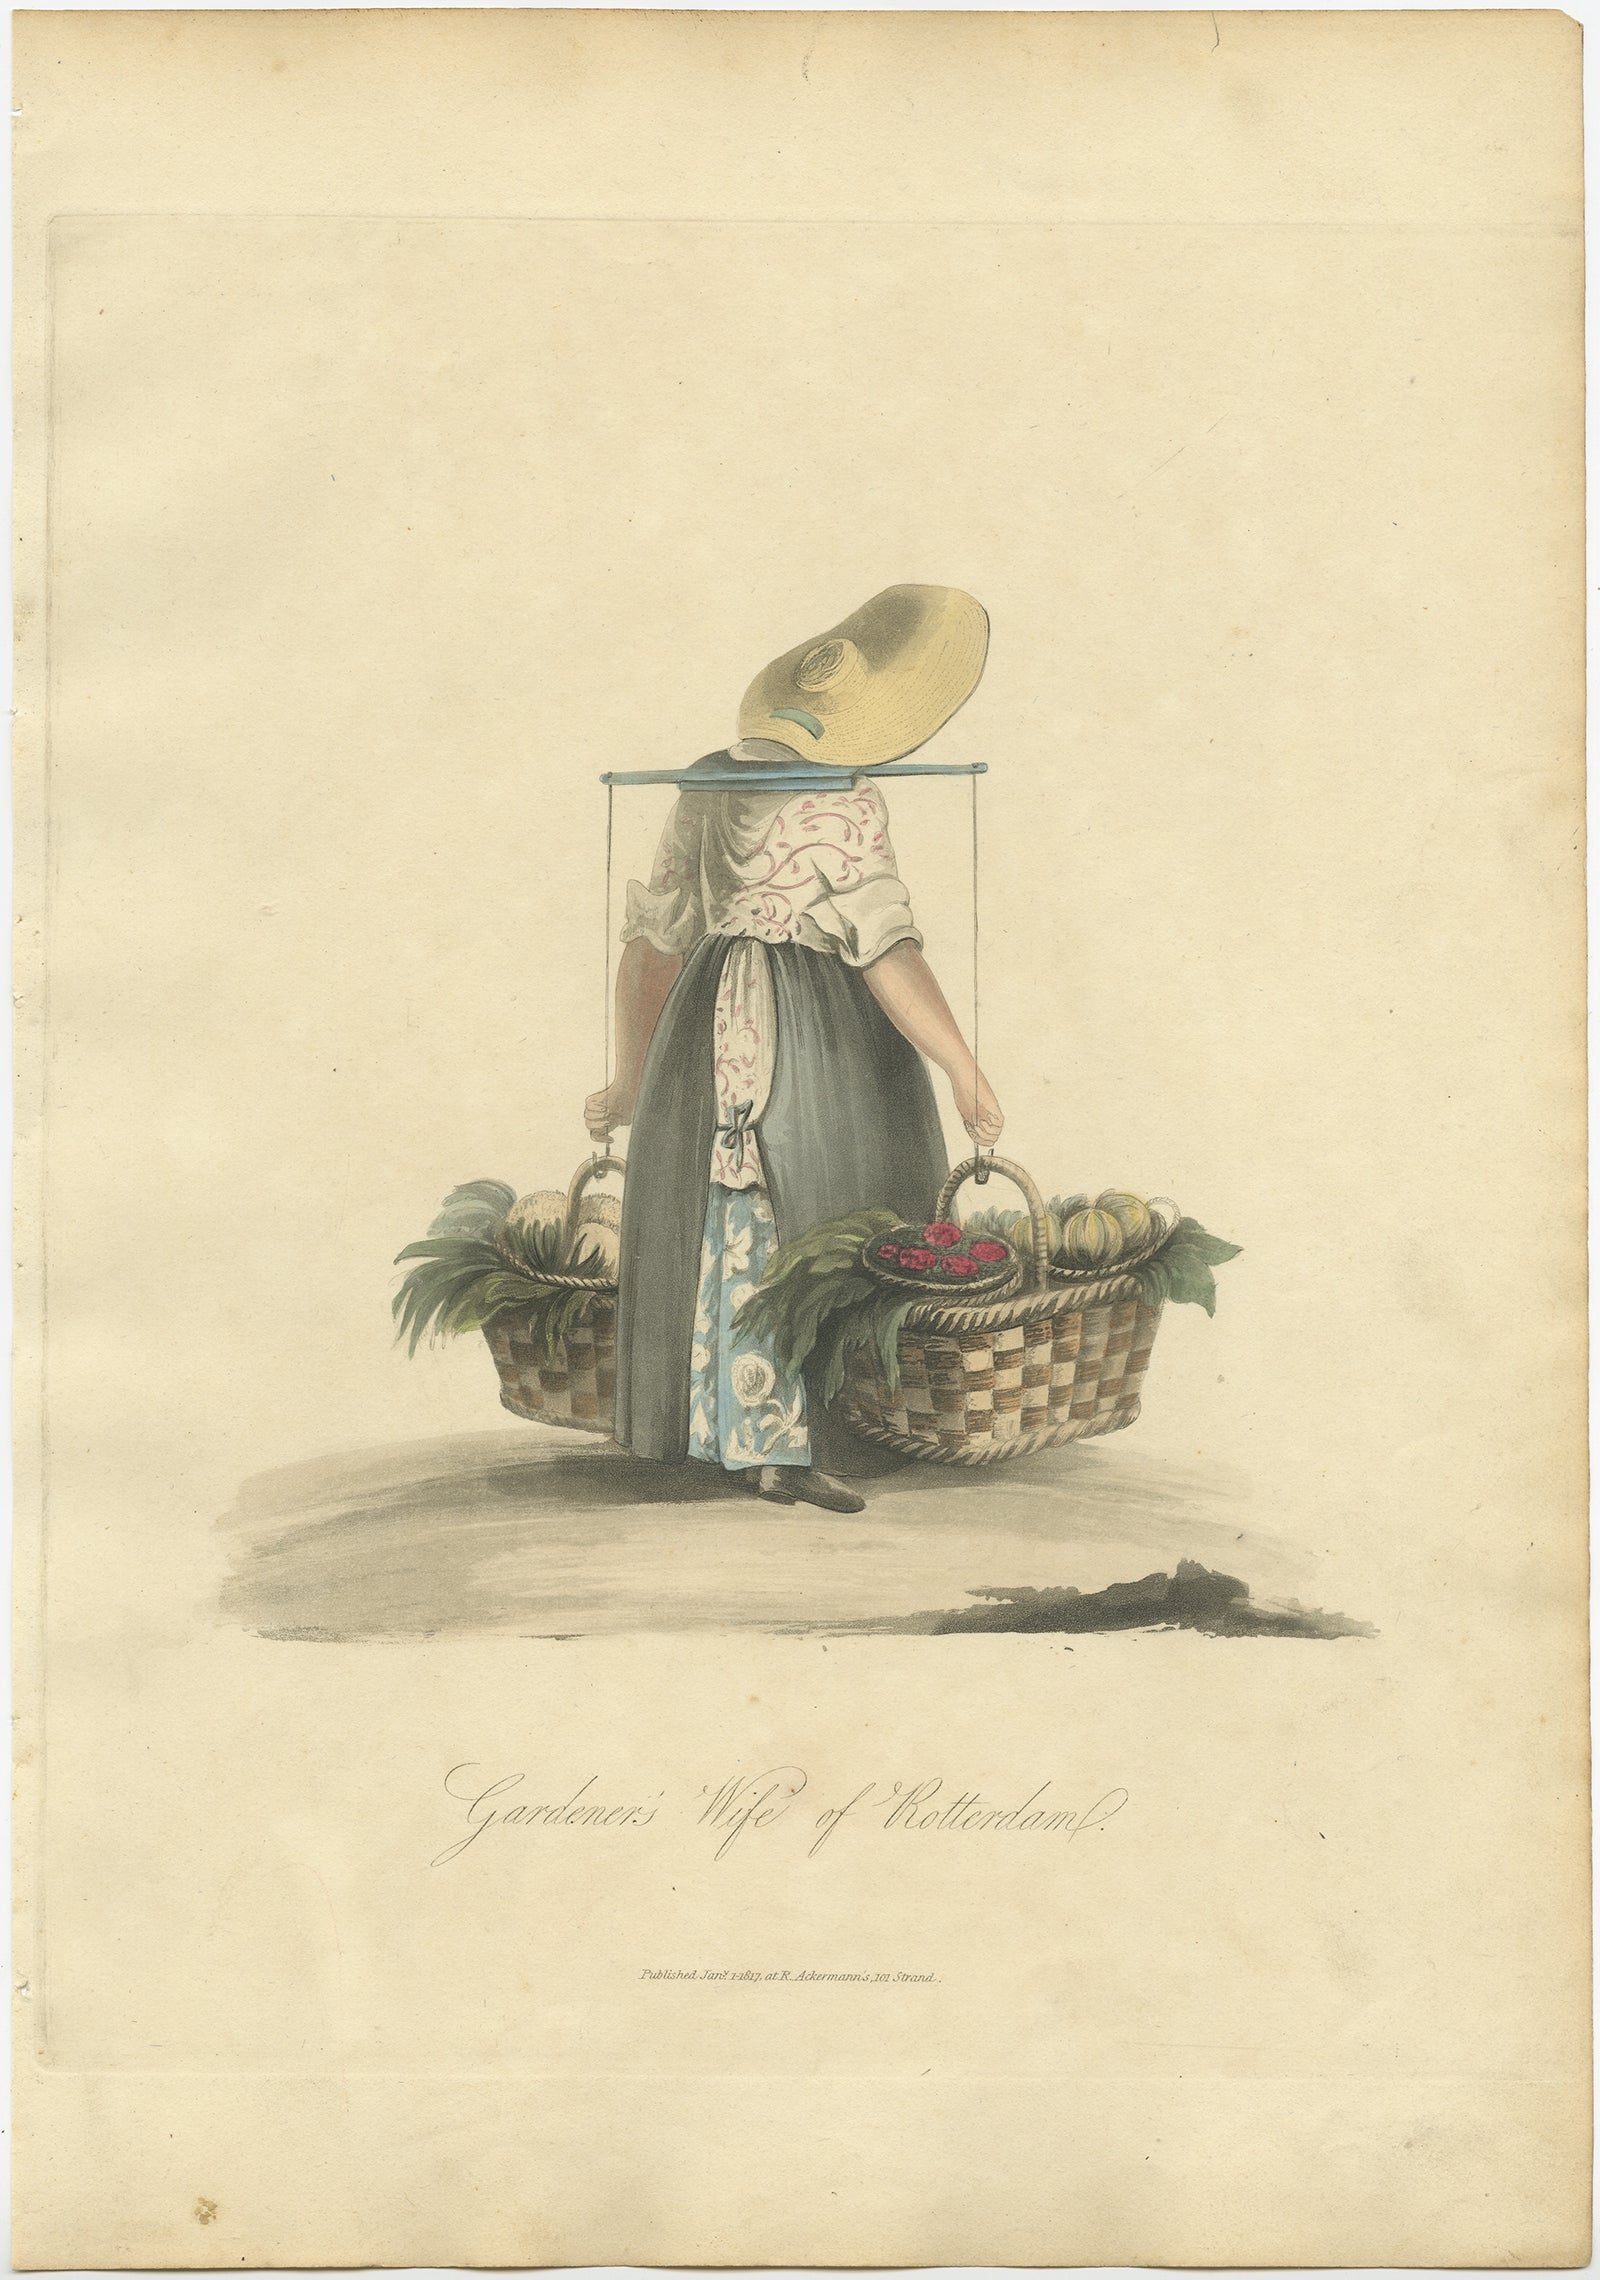 Antique costume print titled 'Gardeners Wife of Rotterdam'. Old costume print depicting a gardeners wife of Rotterdam. This print originates from 'The Costume of the Netherlands displayed in thirty coloured engravings'. 

Artists and Engravers: